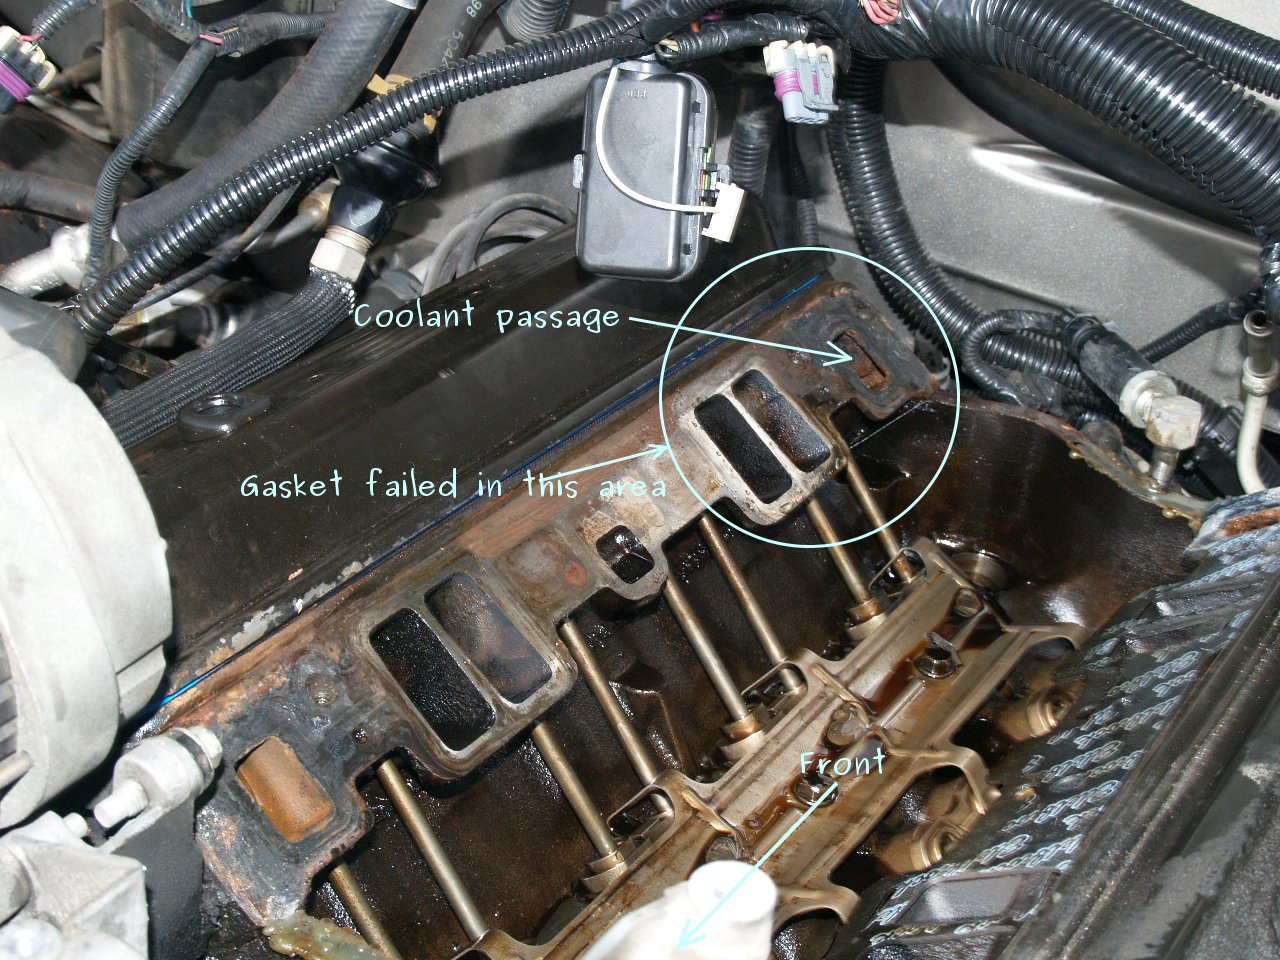 See P2015 in engine